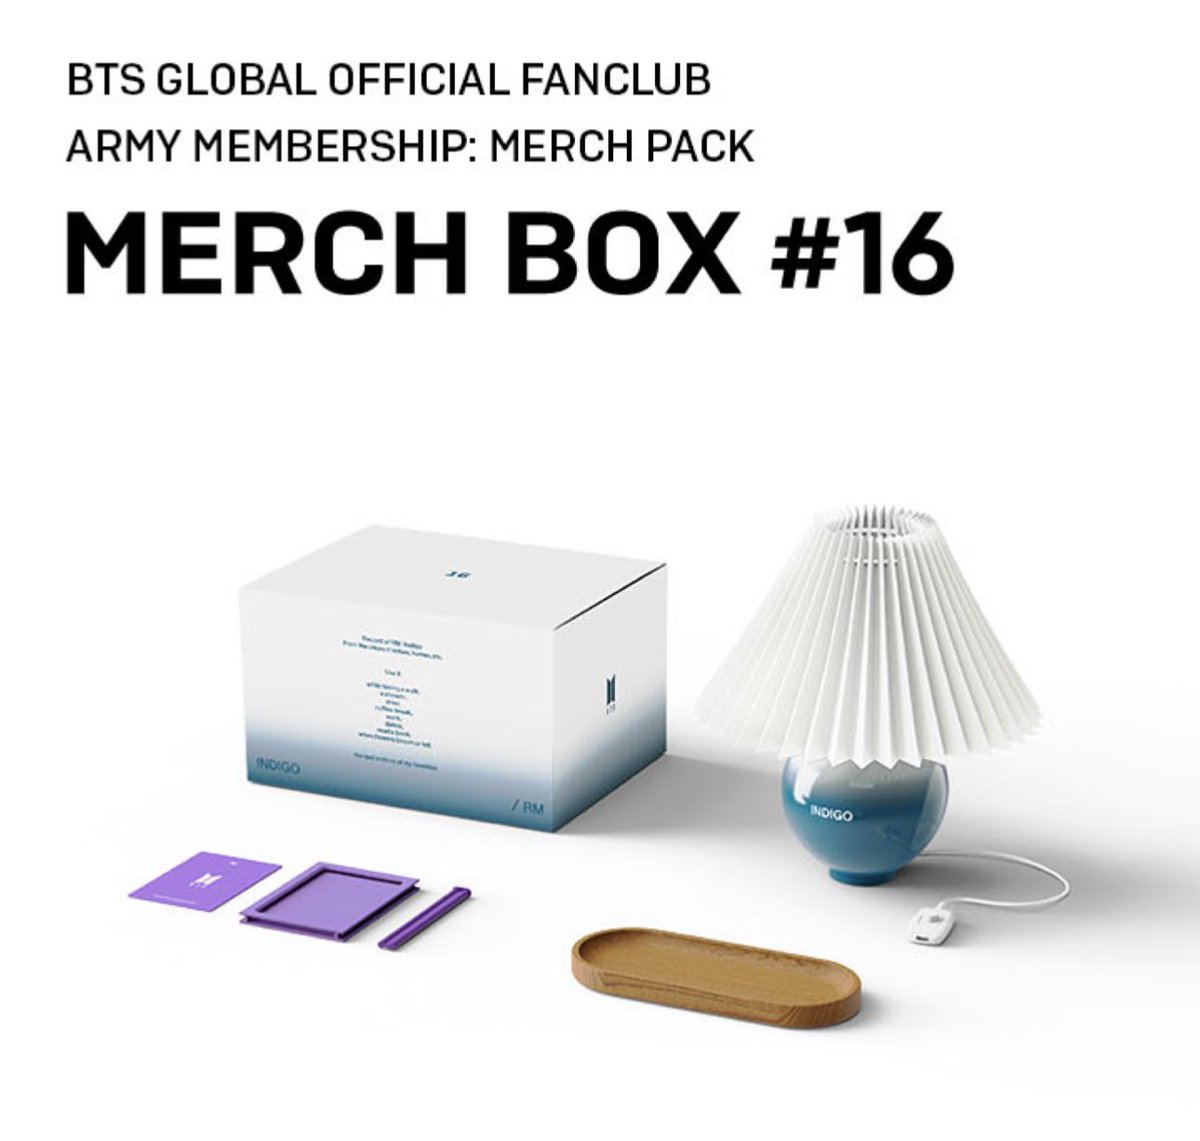 AVAILABLE FOR PRE-ORDER 🛒🛍
WTS LFB ARMY MEMBERSHIP KIT

MERCH BOX #16: INDIGO BOX
includes: Outbox, Ceramic Mood Lamp, Wood Tray, Photo Frame & Photo Card

Pre-order price: 4,500 php all in + shipping

⭕️ SLOTS SECURED FROM WEVERSE (Change in KR Address possible)

CAN SHIP WW